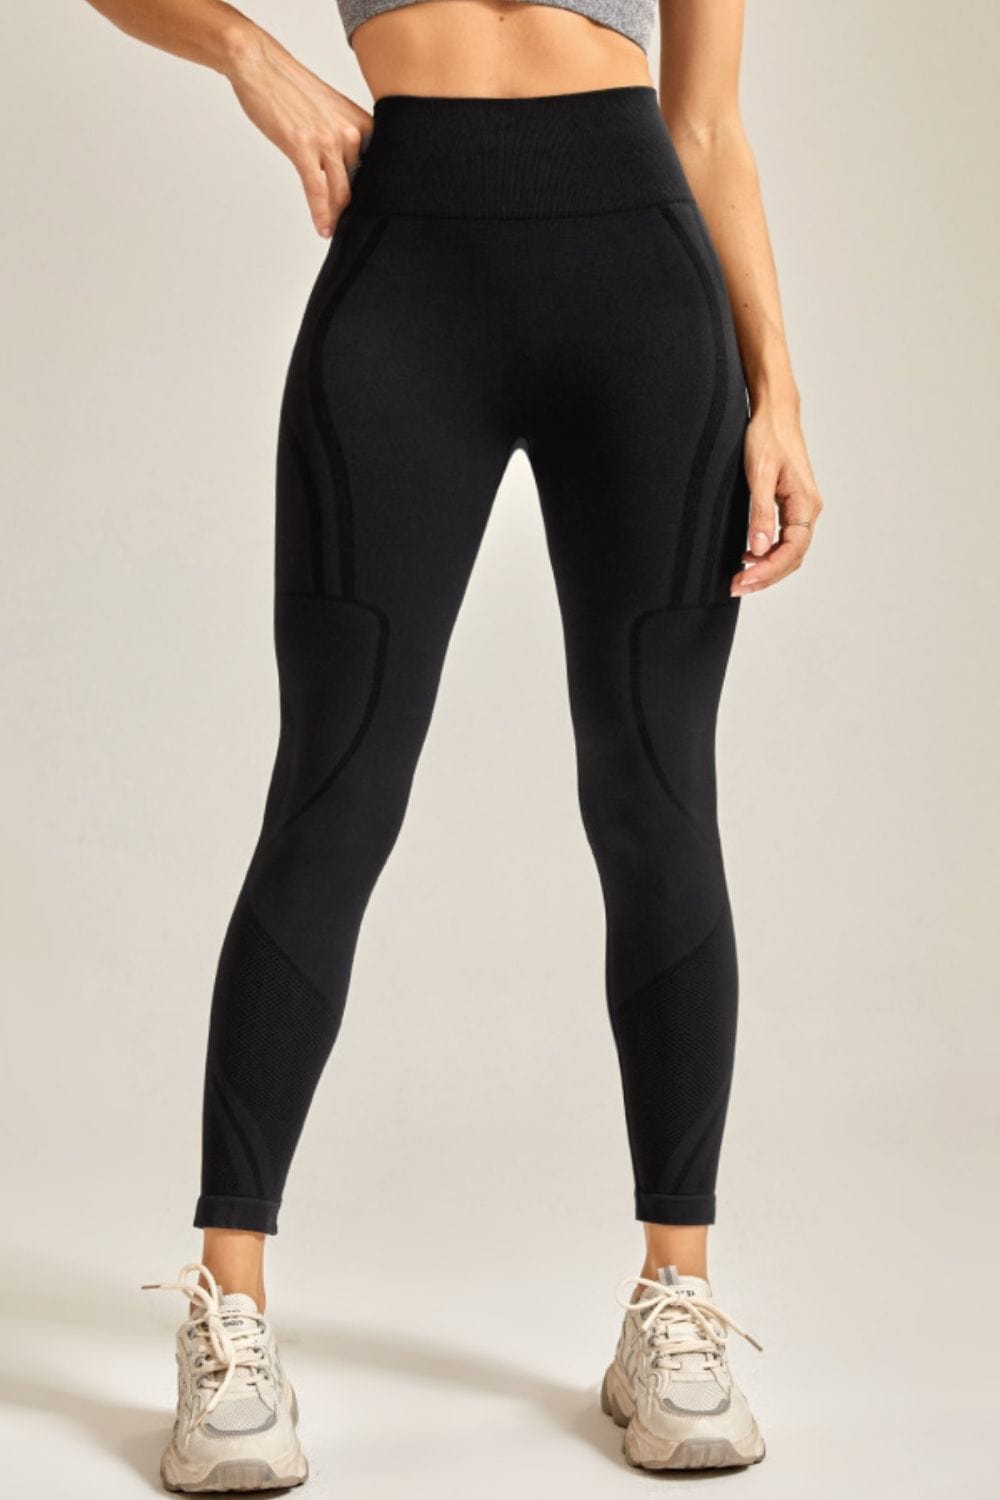 Wide Waistband Long Active Pants - Body By J'ne